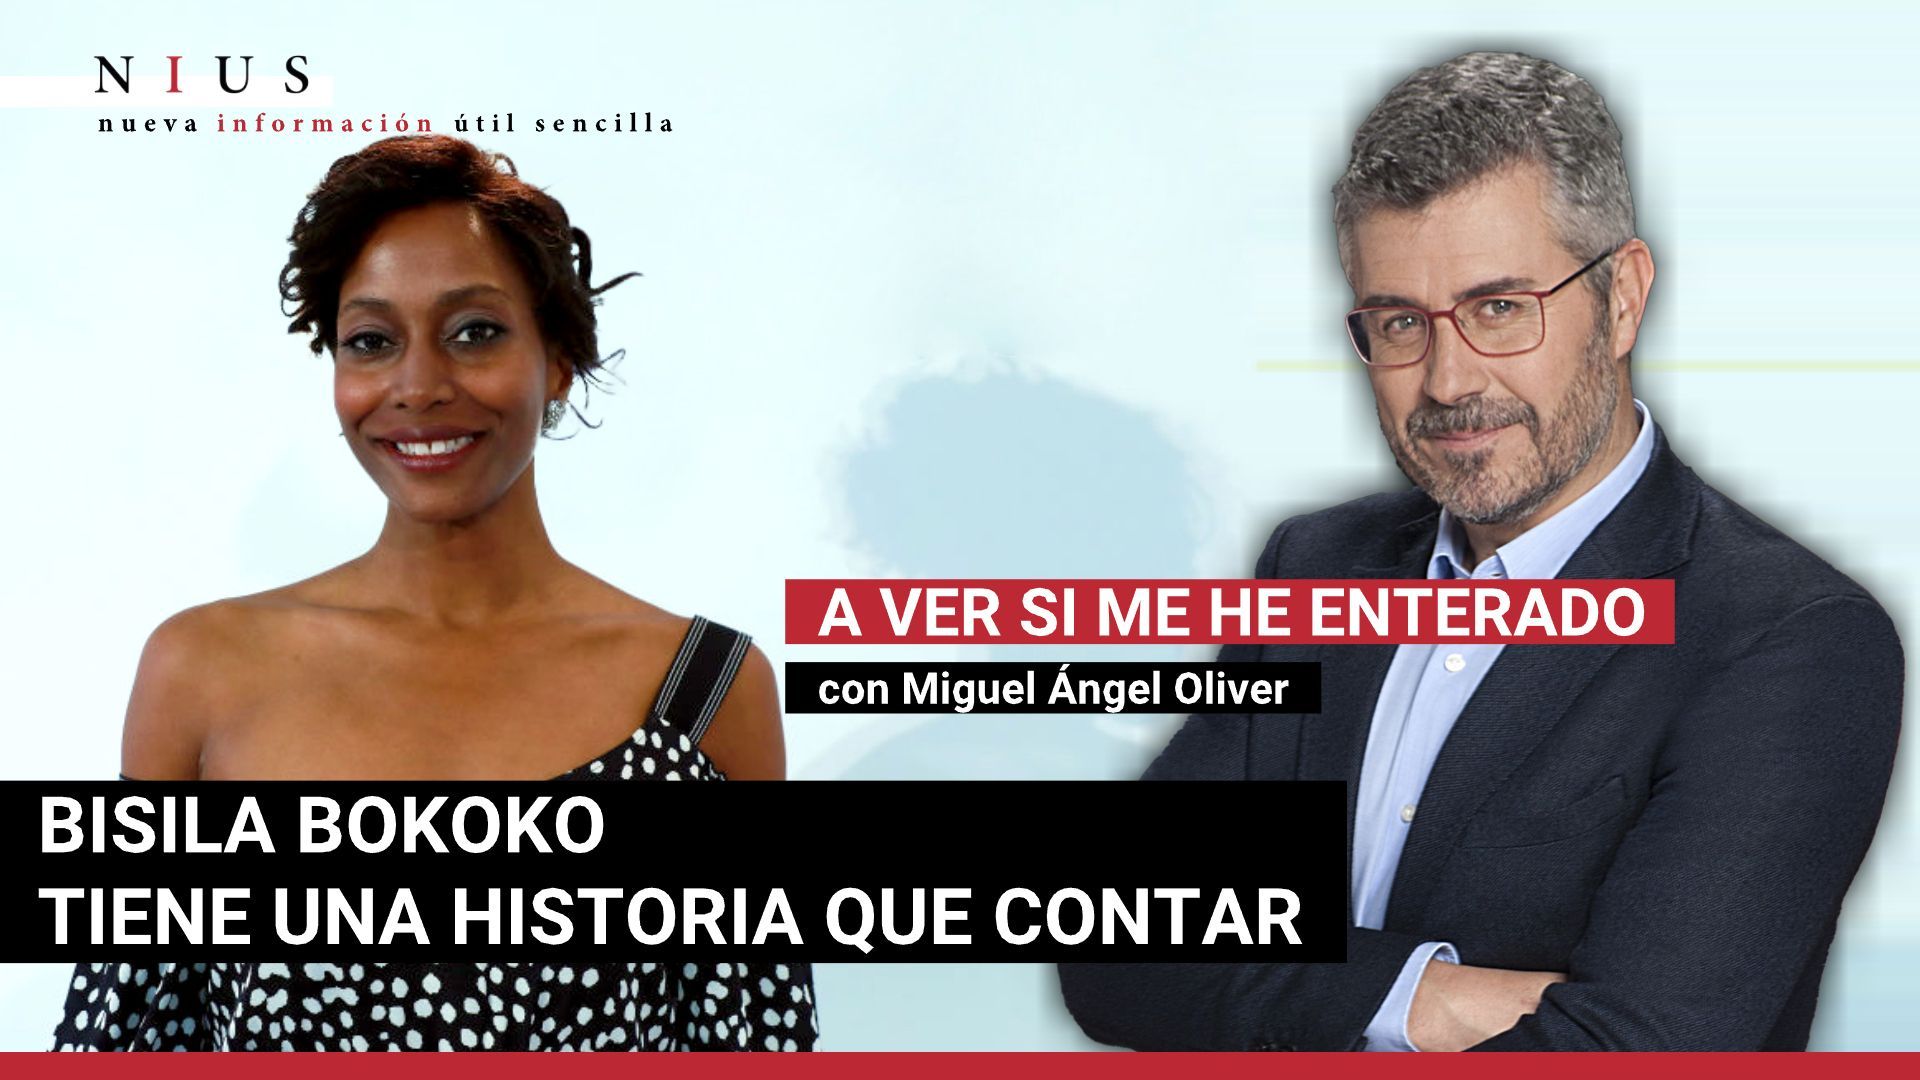 Videopodcast Let’s see if I’ve heard, with Miguel Ángel Oliver: Black and a lady, Bisila Bokoko has a narrative to inform